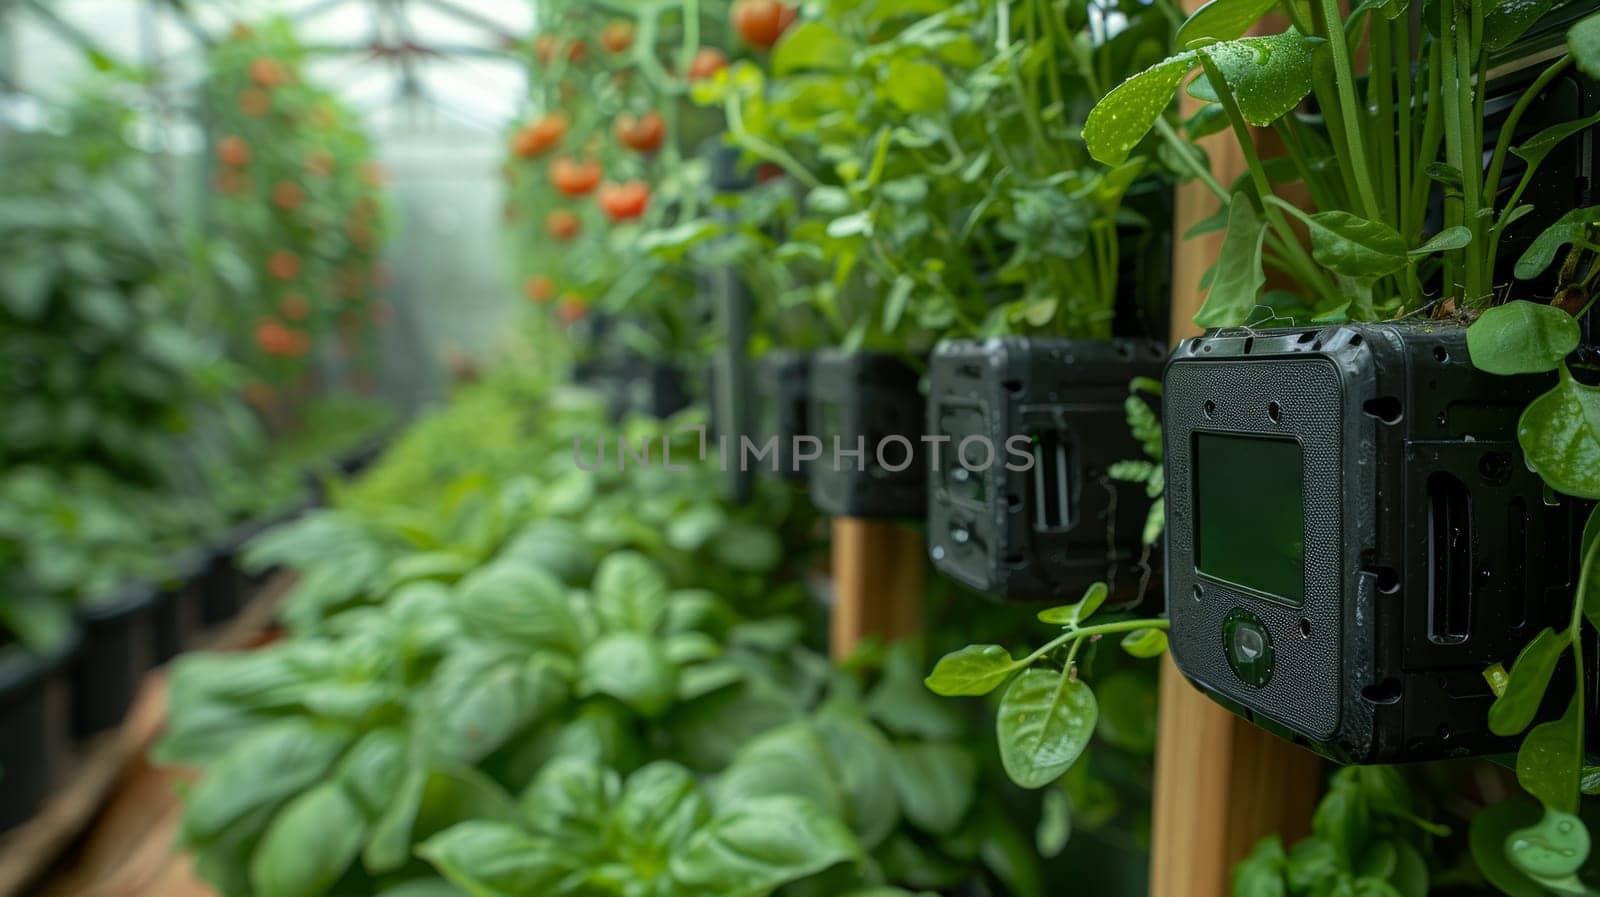 Hydroponic Farm Technology. Monitoring Sensors, Automation, and Vertical Gardens for Sustainable Agriculture by ailike